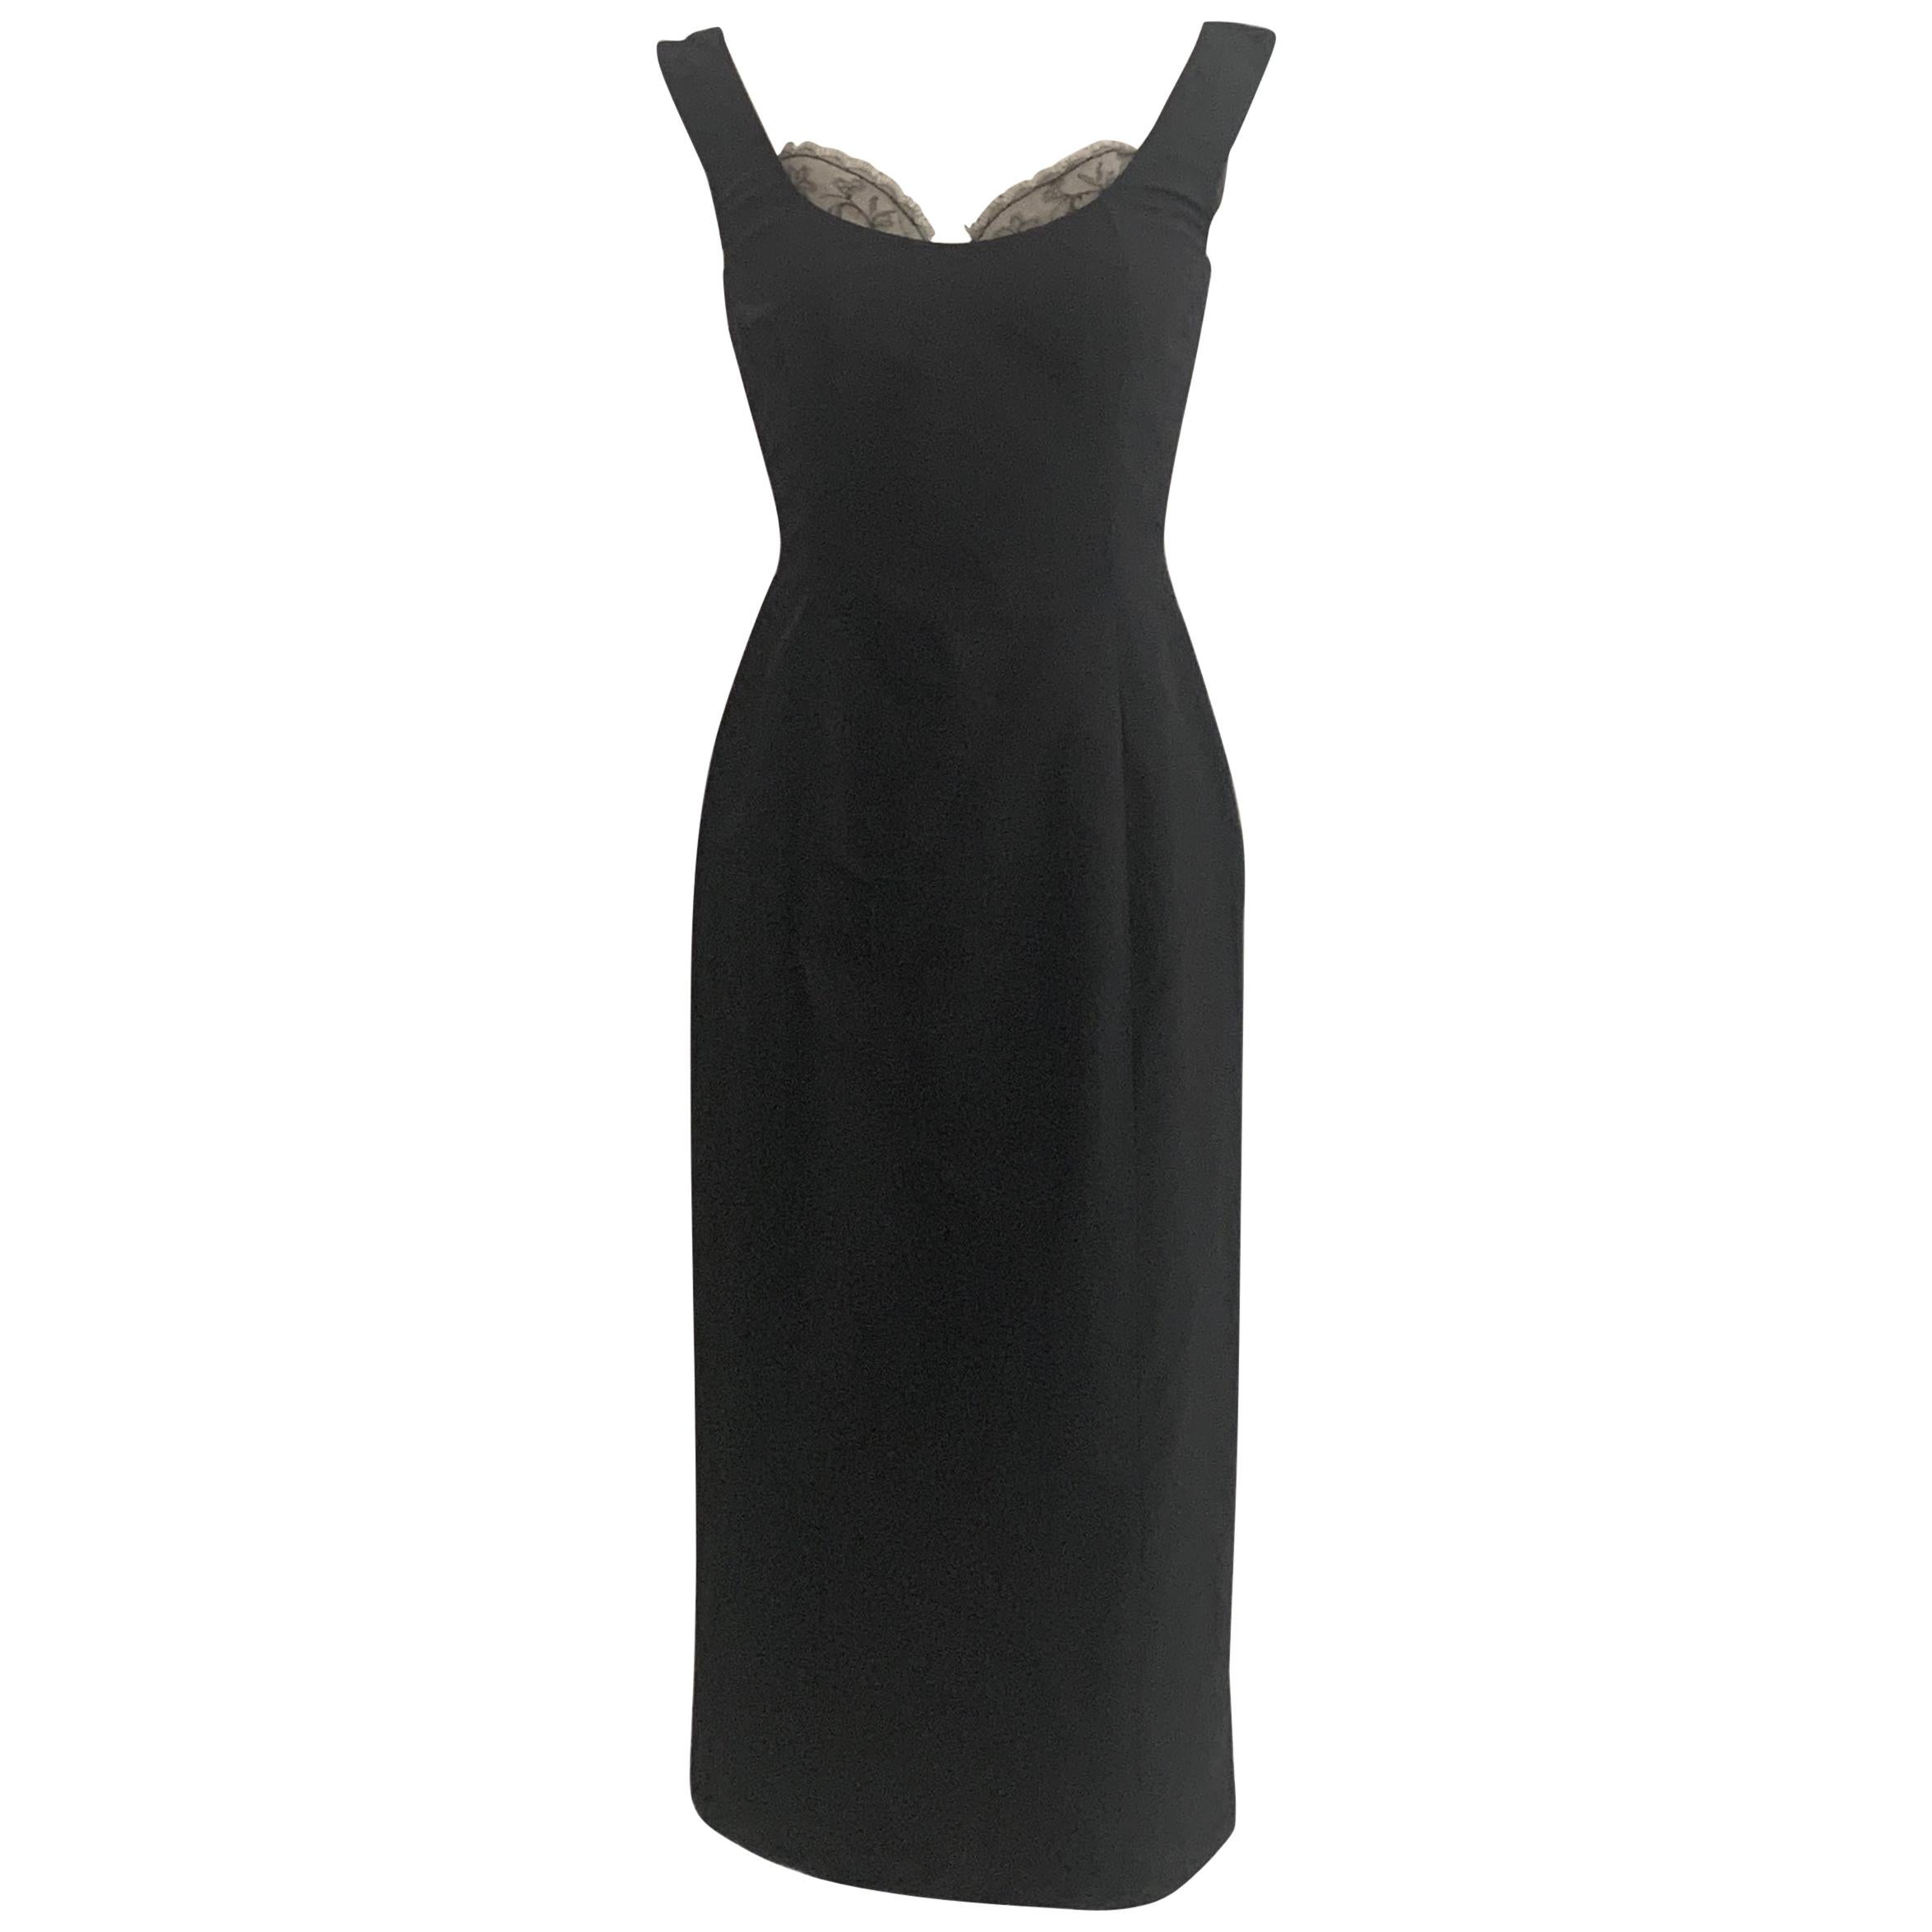 Alexander McQueen 2005 Black Silk Sleeveless Midi Cocktail Dress with Lace Trim For Sale